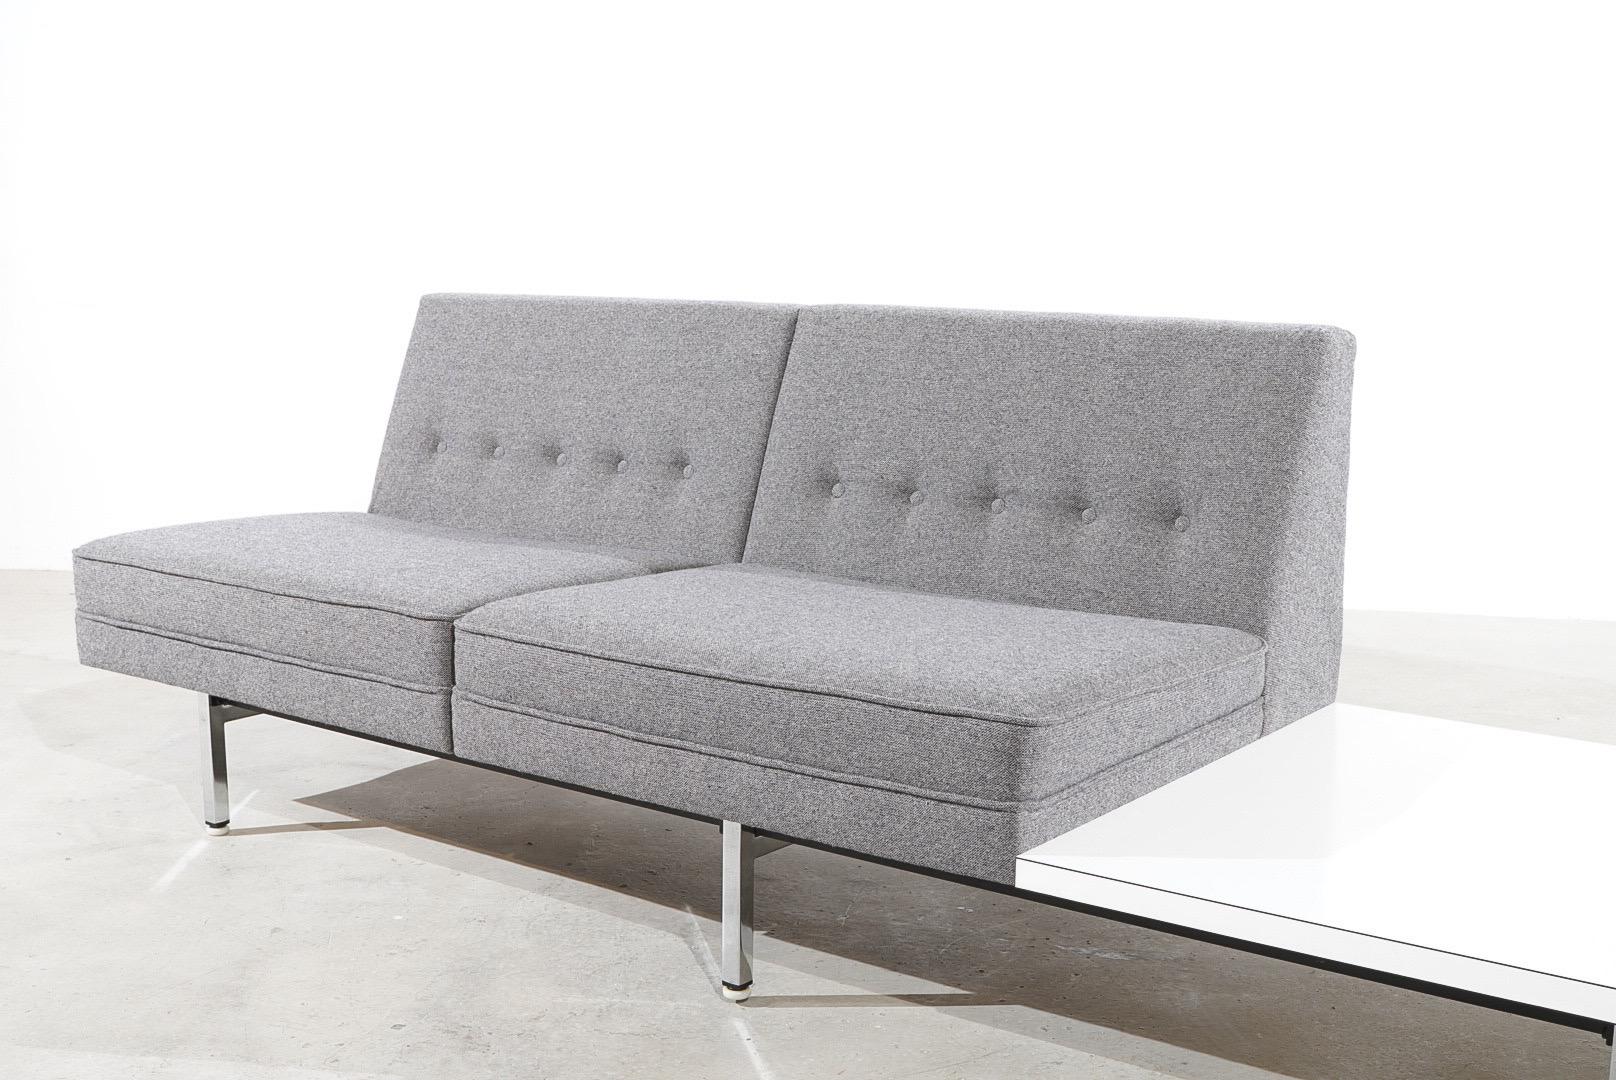 Modular Sofa by George Nelson with a strong metal structure including chrome-plated feet. Two vintage grey upholstered Seats with buttoned backrests and a square Formica side-table top. 

George Nelson (1908 - 1986). Returning home from a stay in